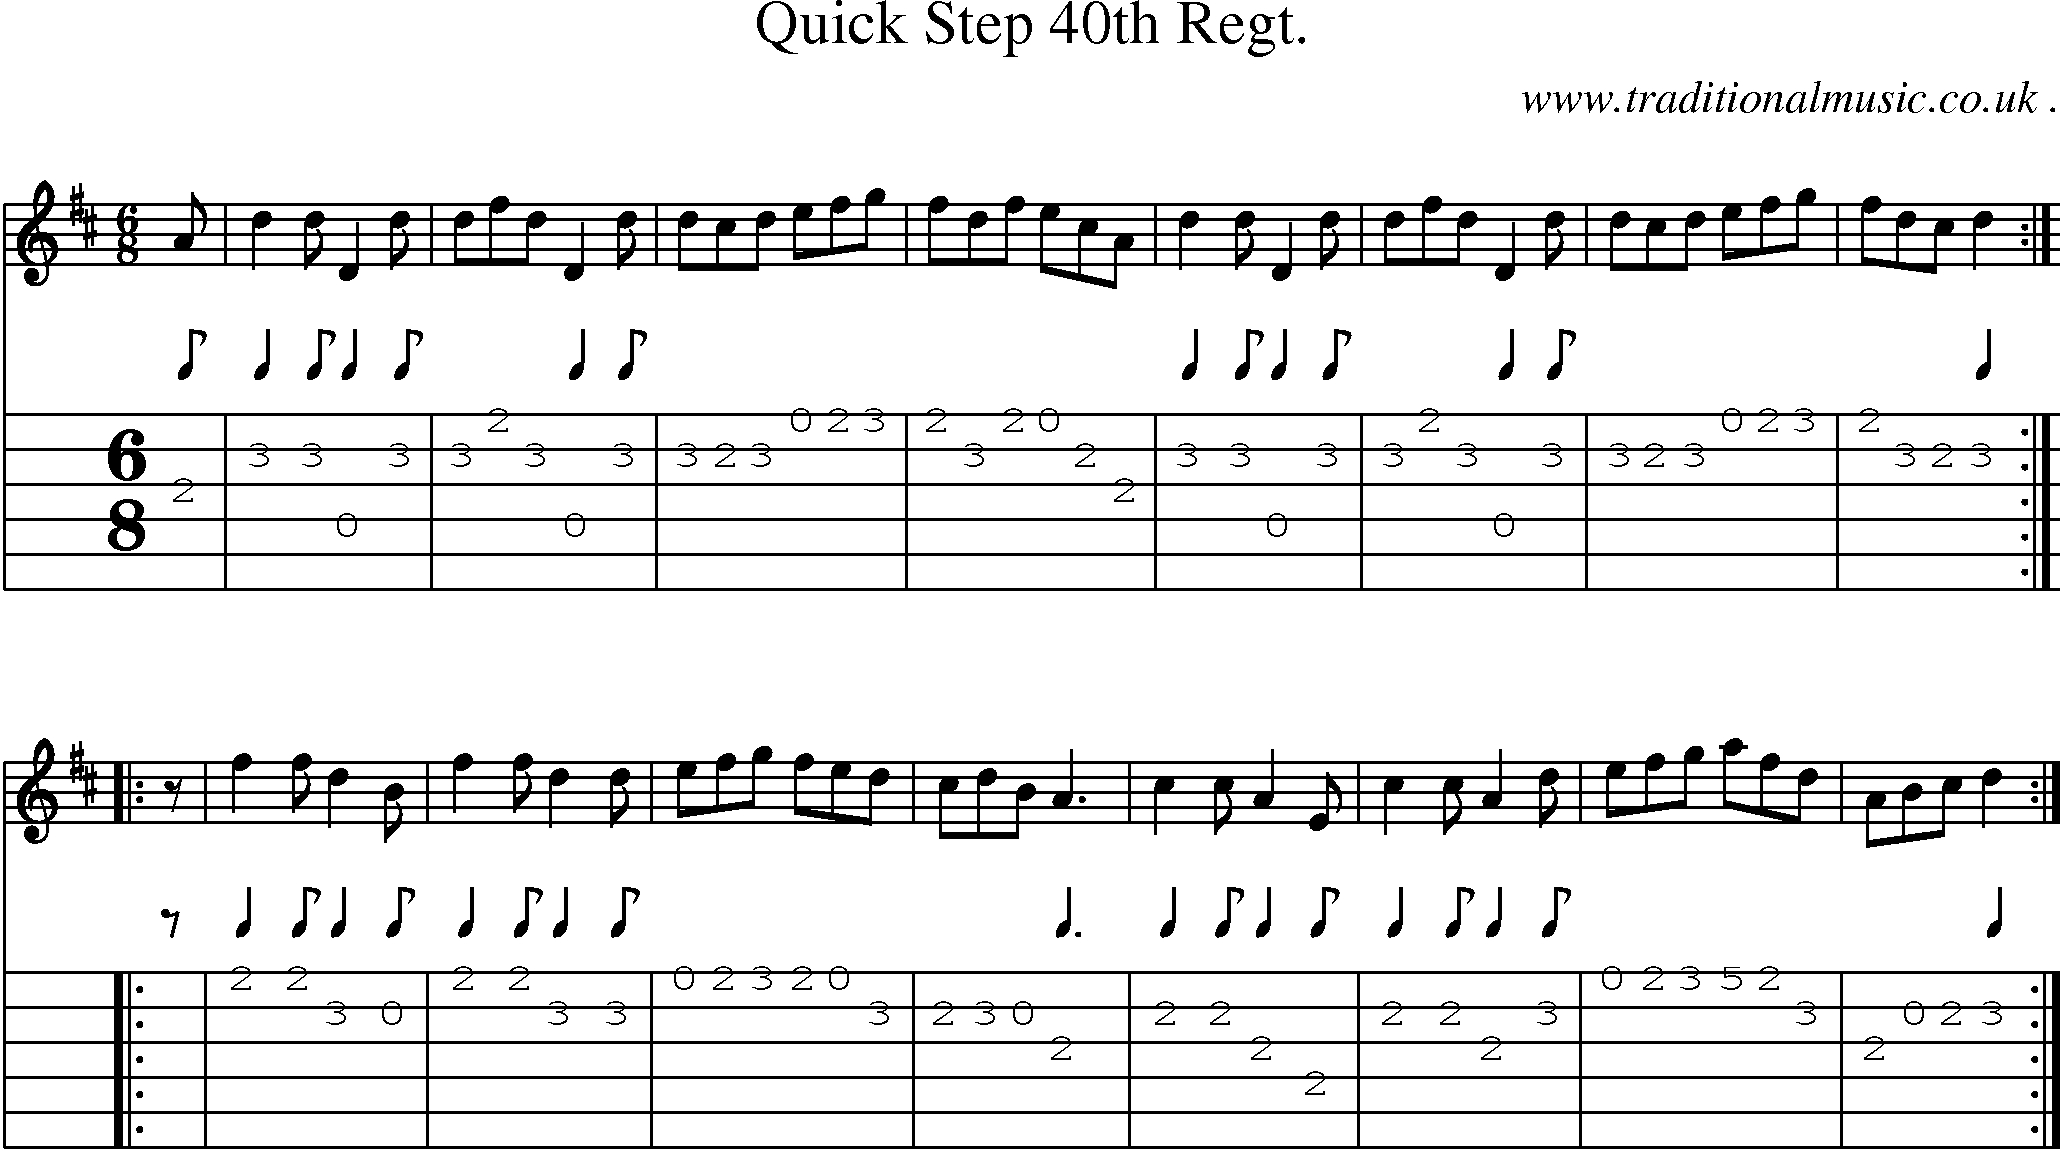 Sheet-Music and Guitar Tabs for Quick Step 40th Regt